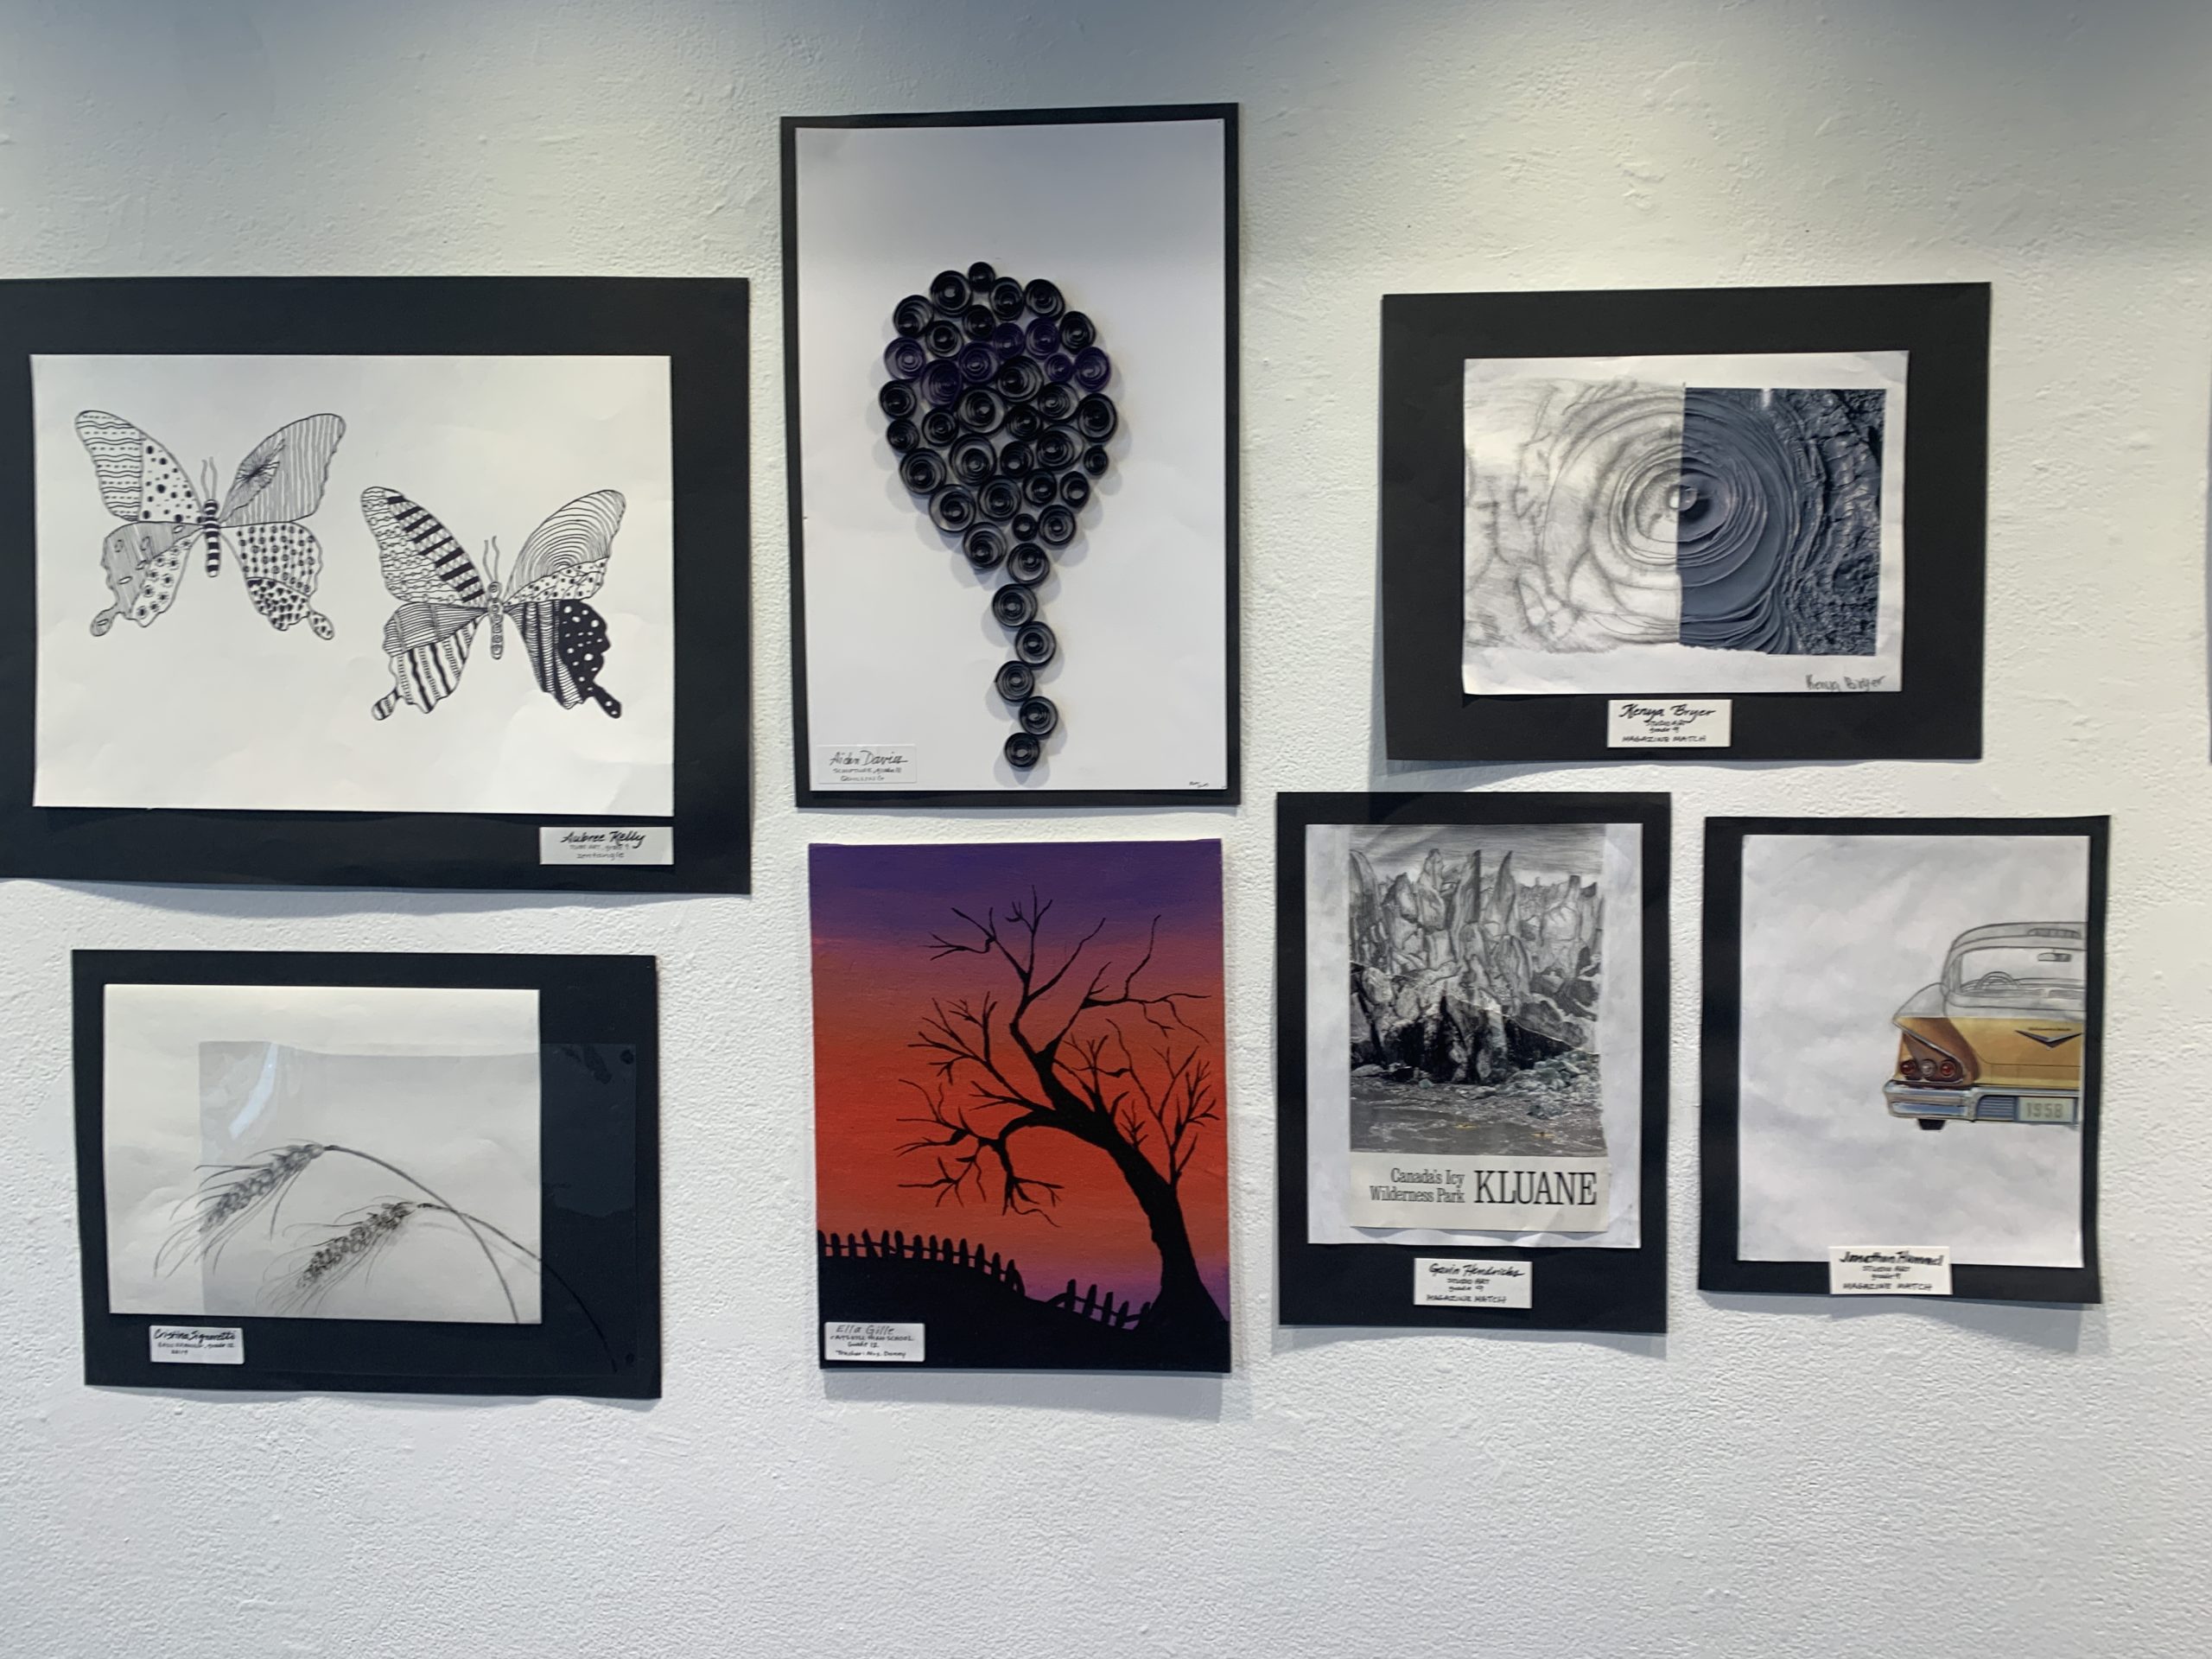 student paintings on gallery wall